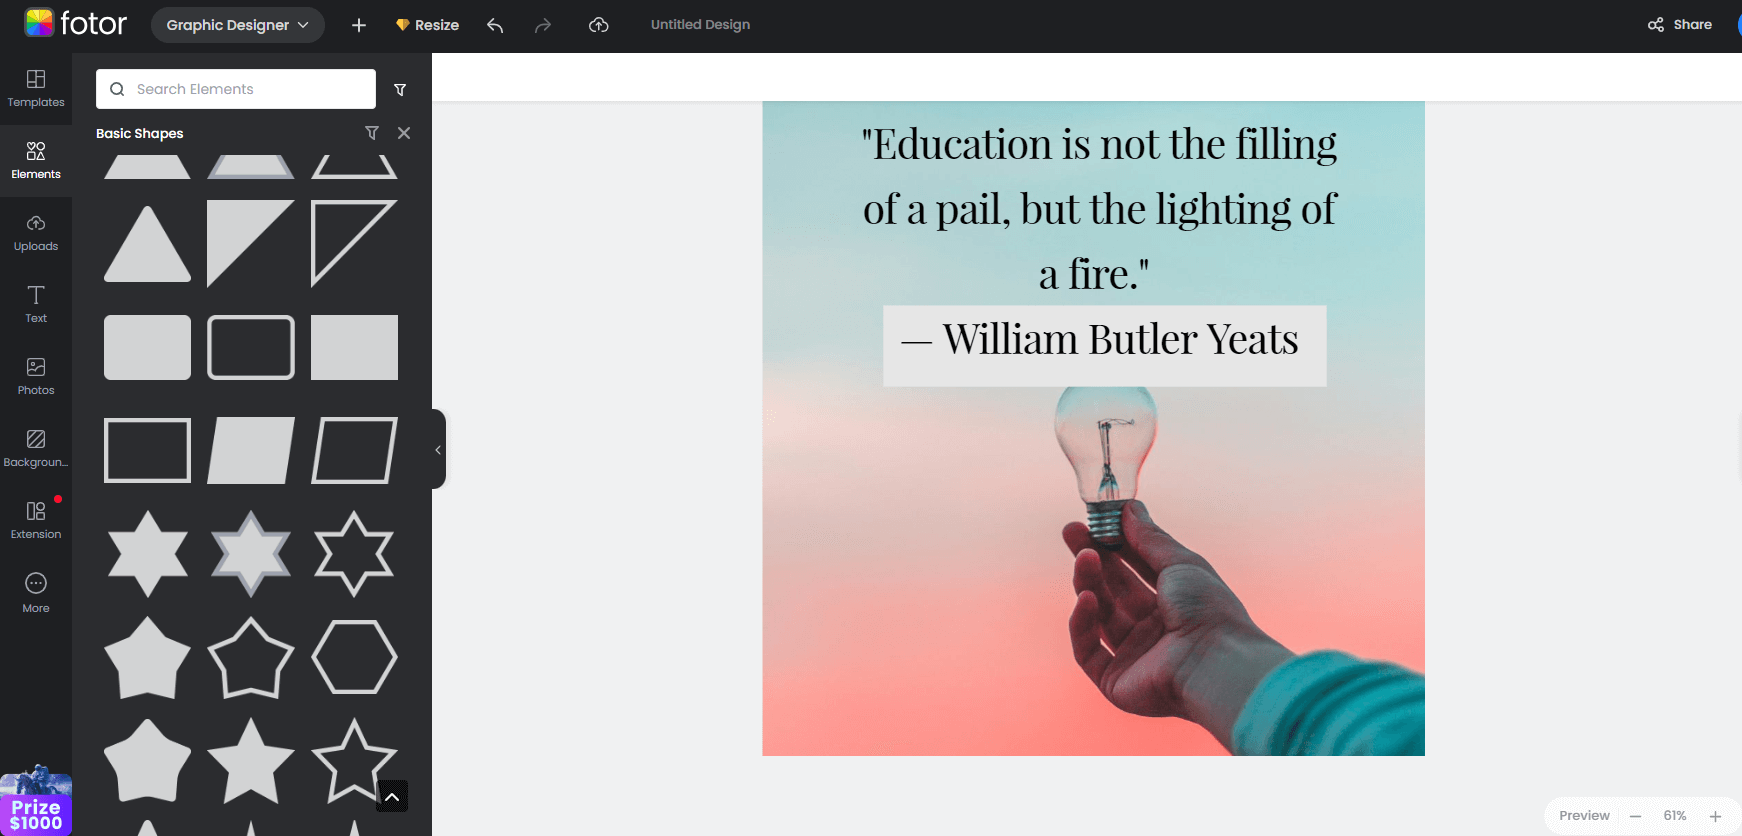 add basic shape to highlight the notable figure who speaks this education quote